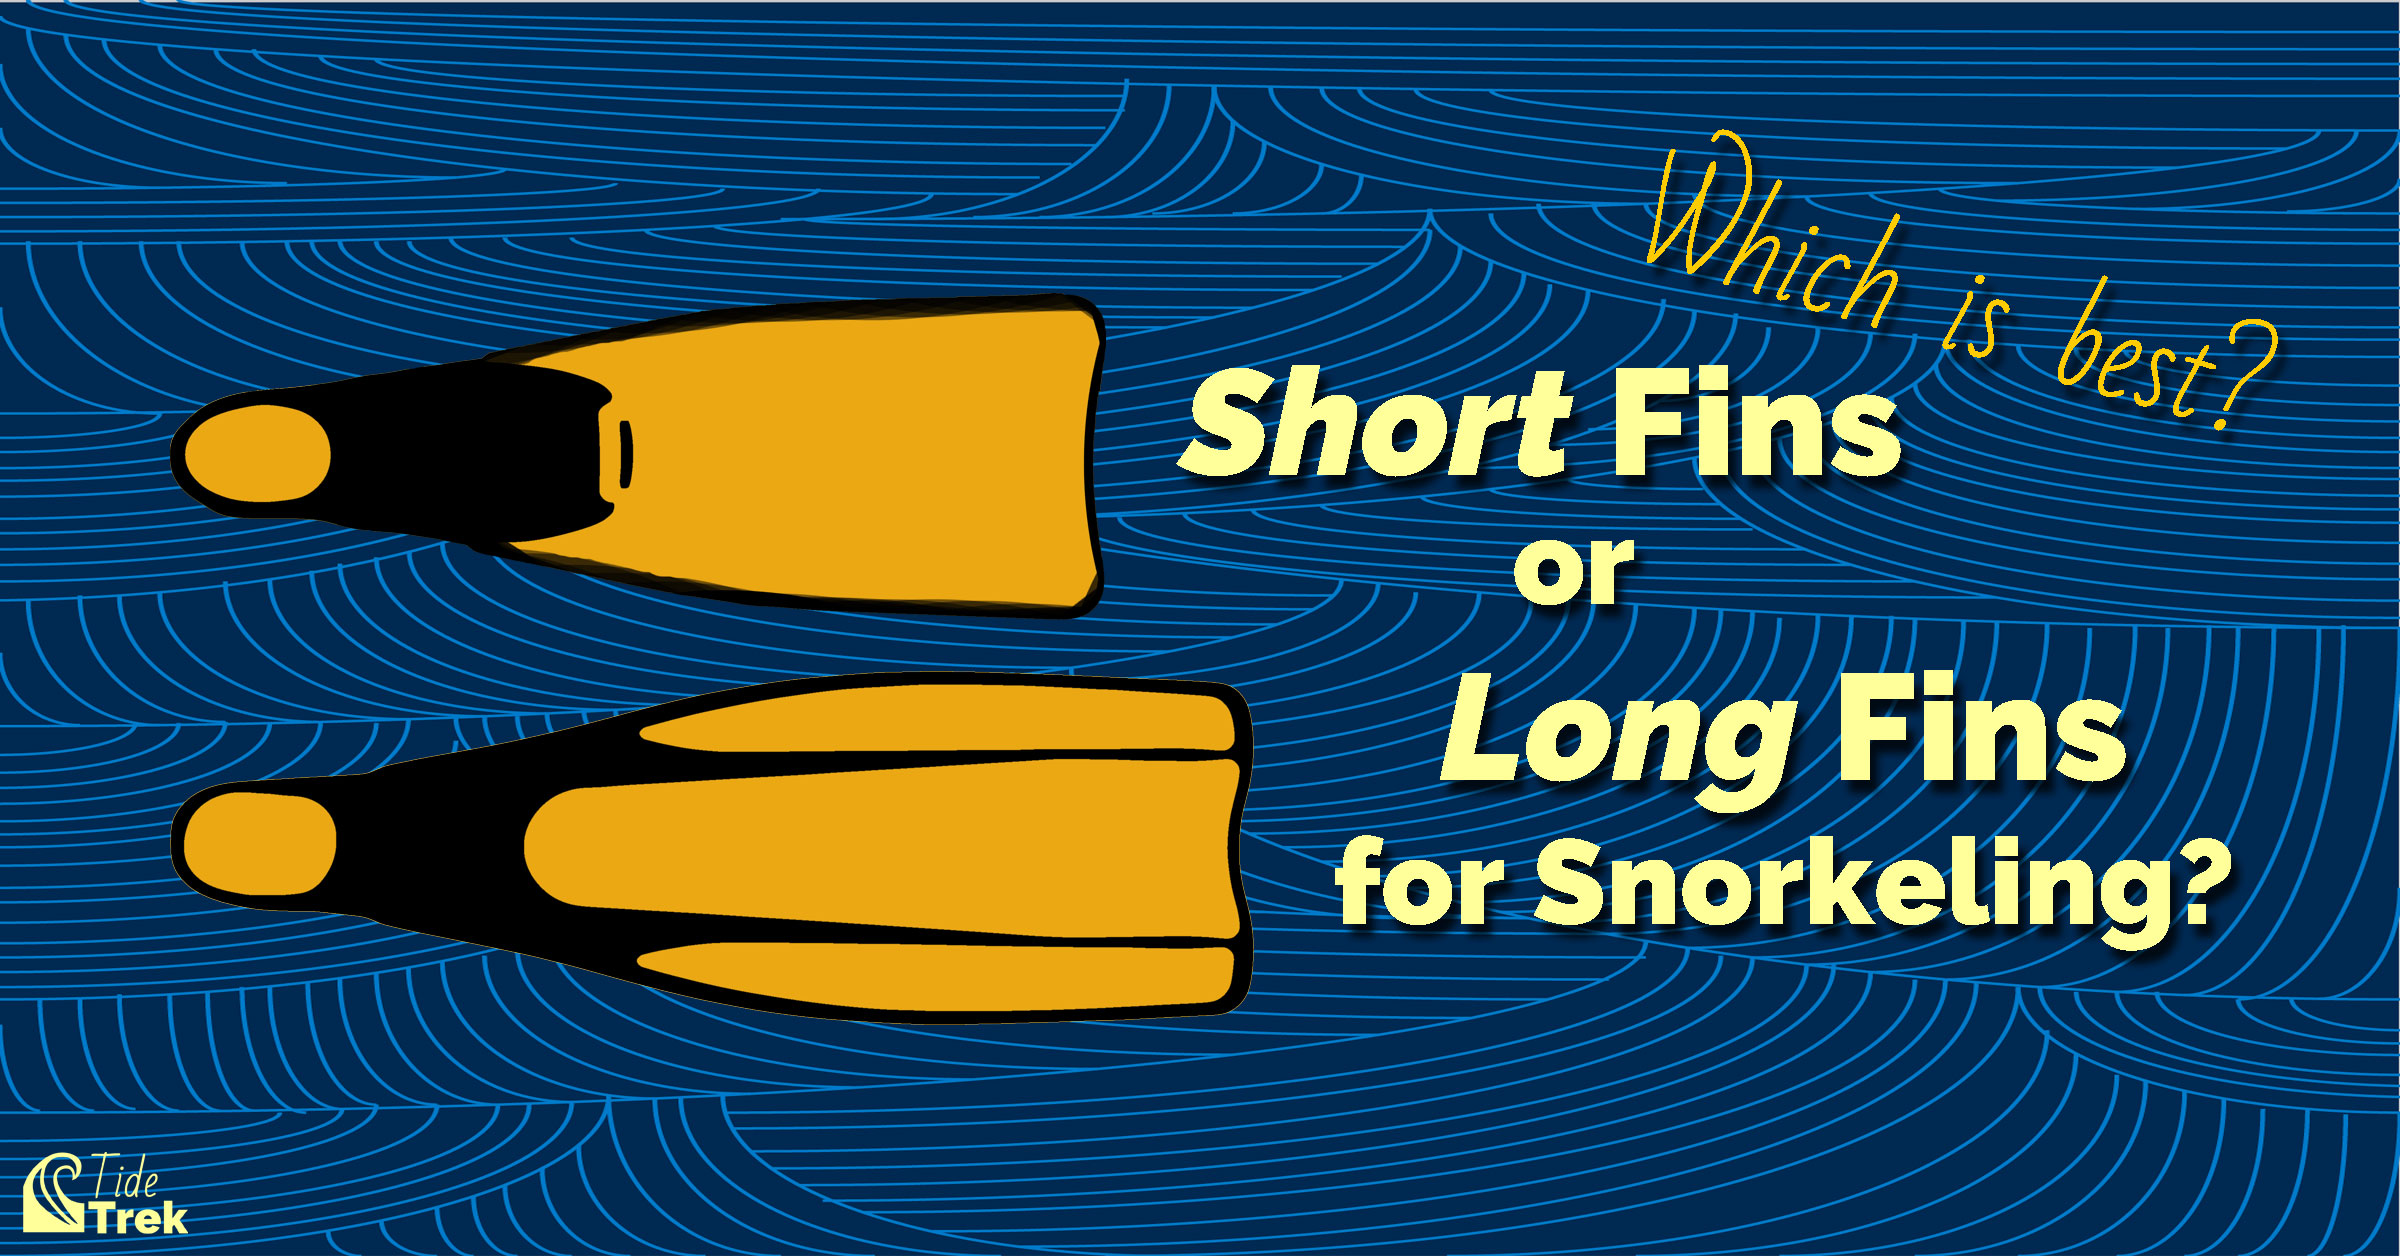 Which is best? Short fins or long fins for snorkeling? With cartoons of a long and short fin